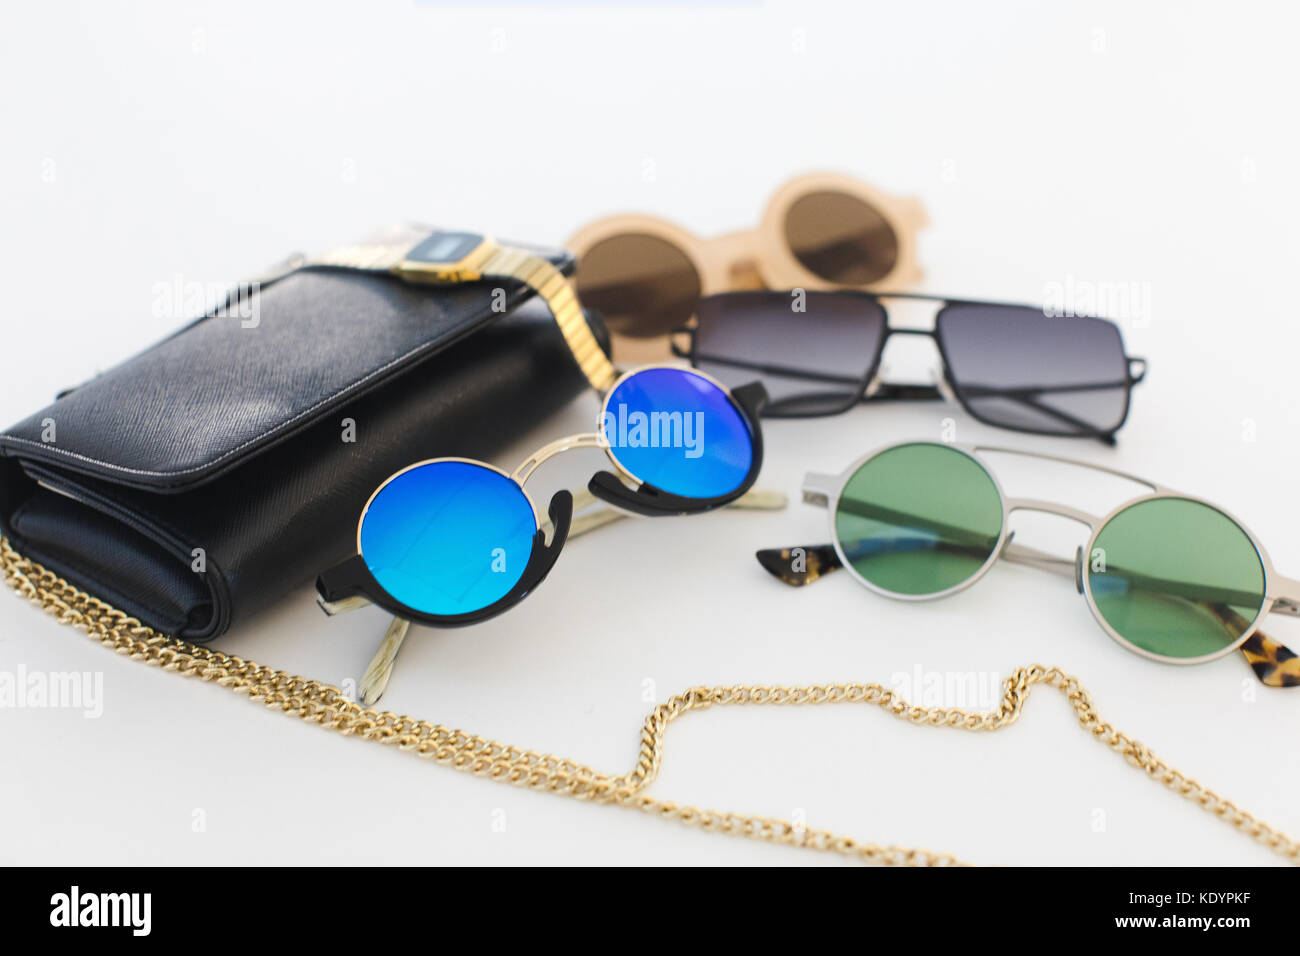 Different sunglasses and handbag on a white background Stock Photo